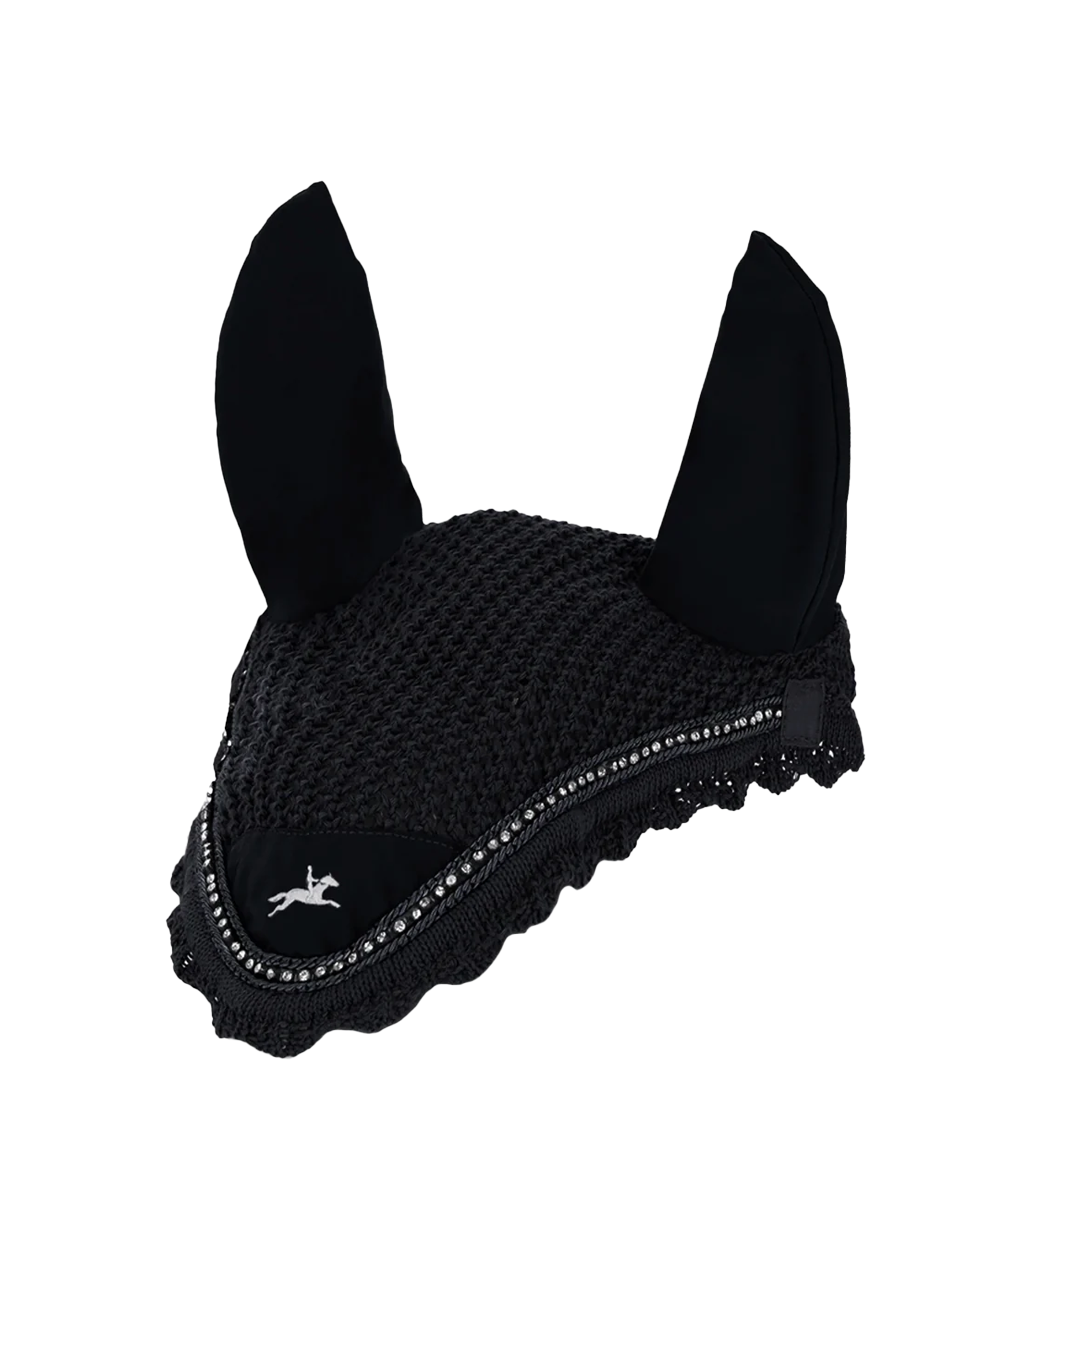 Schockemohle Fly Veil Fly Bonnet Schockemohle - Equestrian Fashion Outfitters